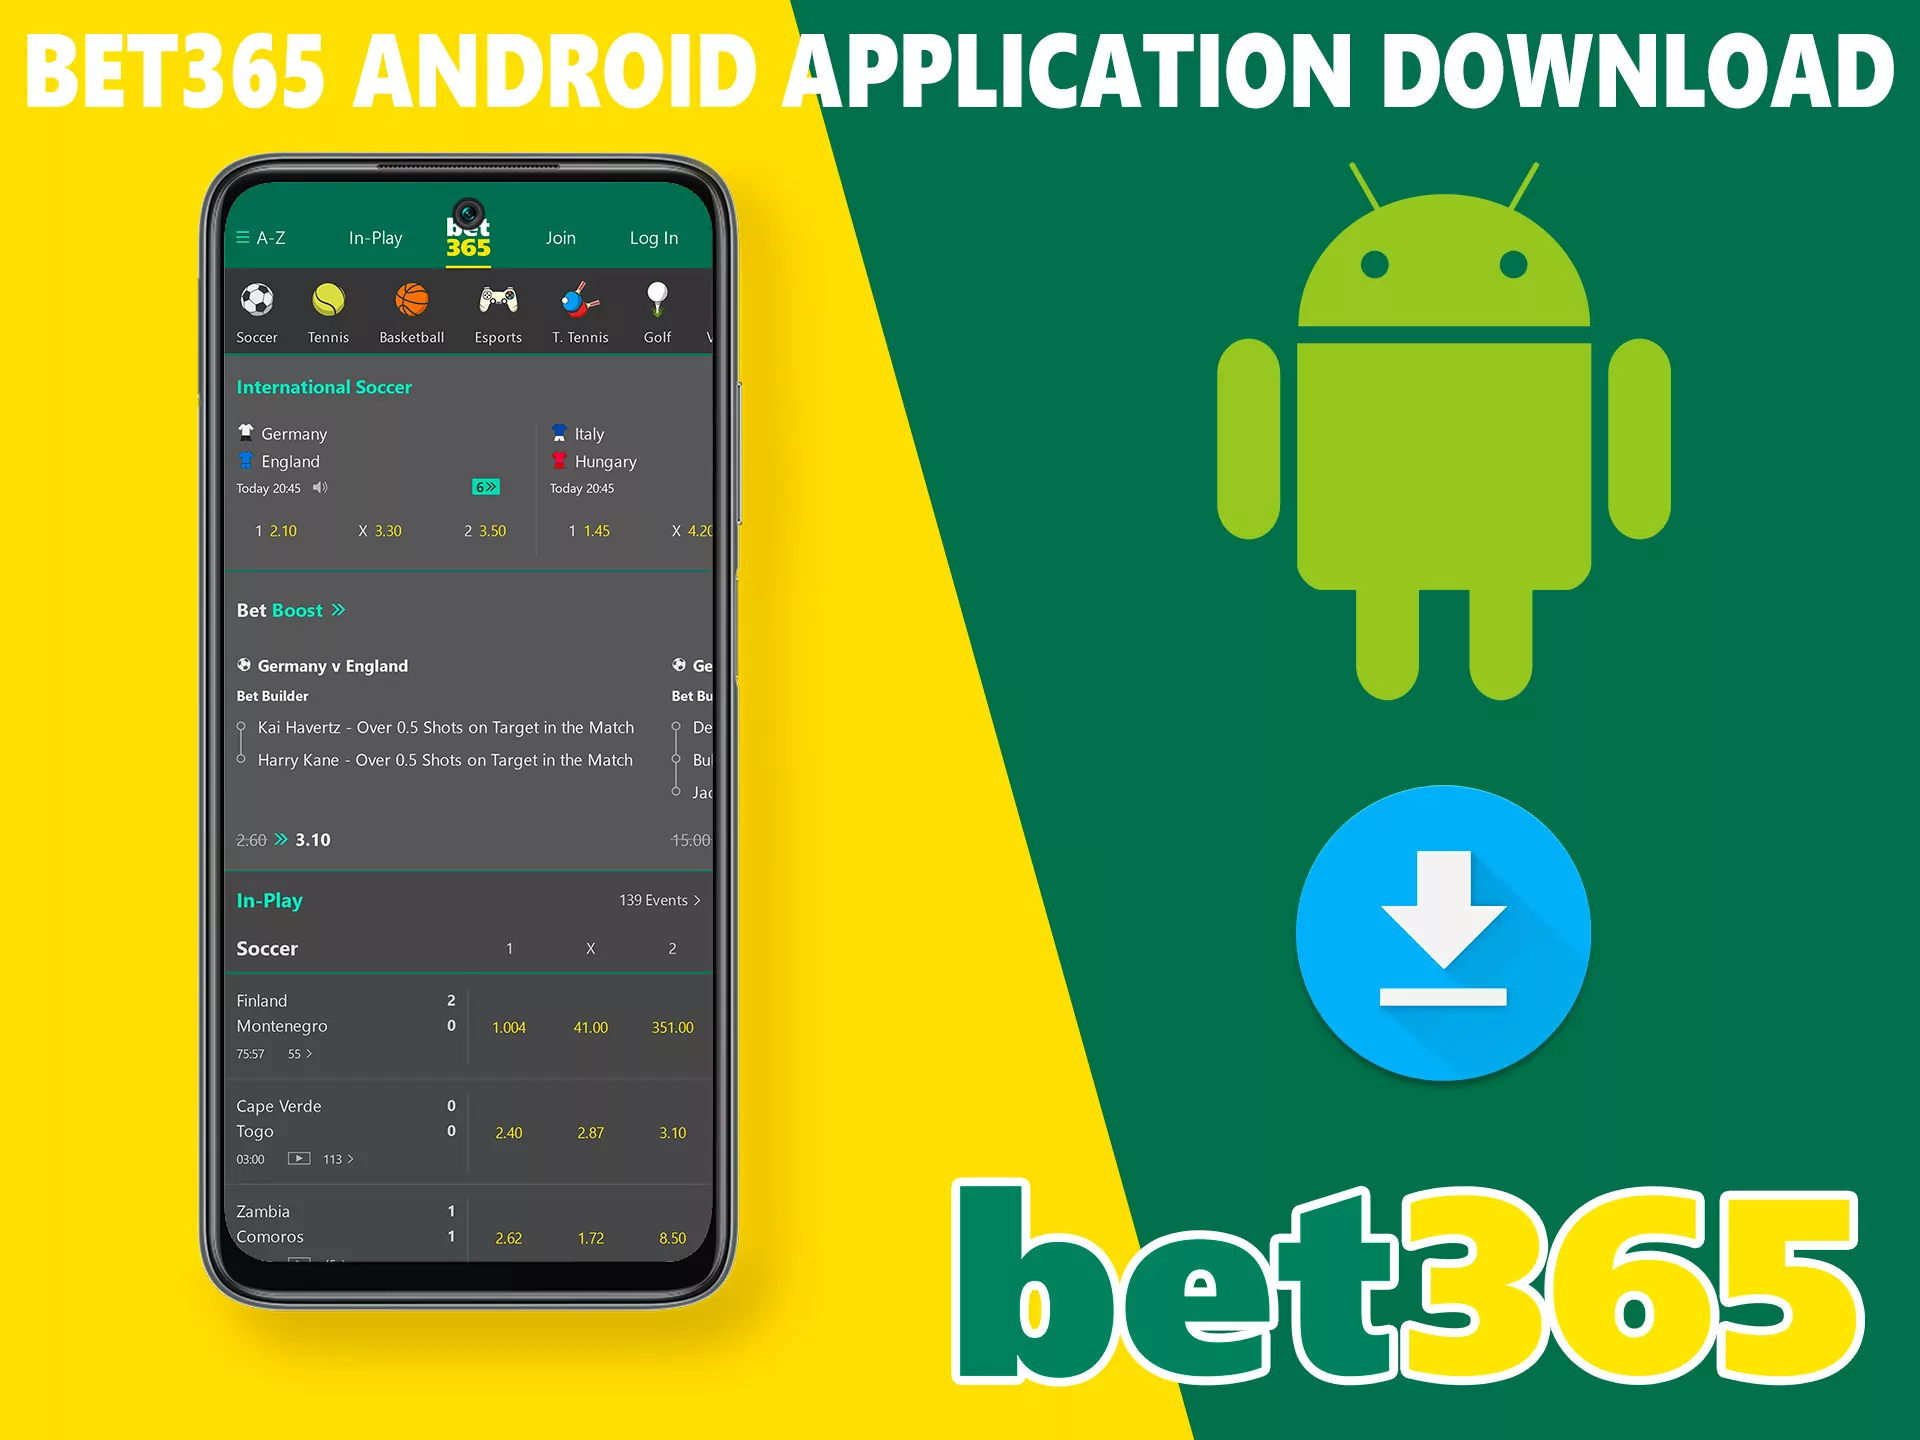 The Play Store usually limits the publication of applications similar in theme, Bet 365 is no exception, but you can download it from the official website of the bookmaker.